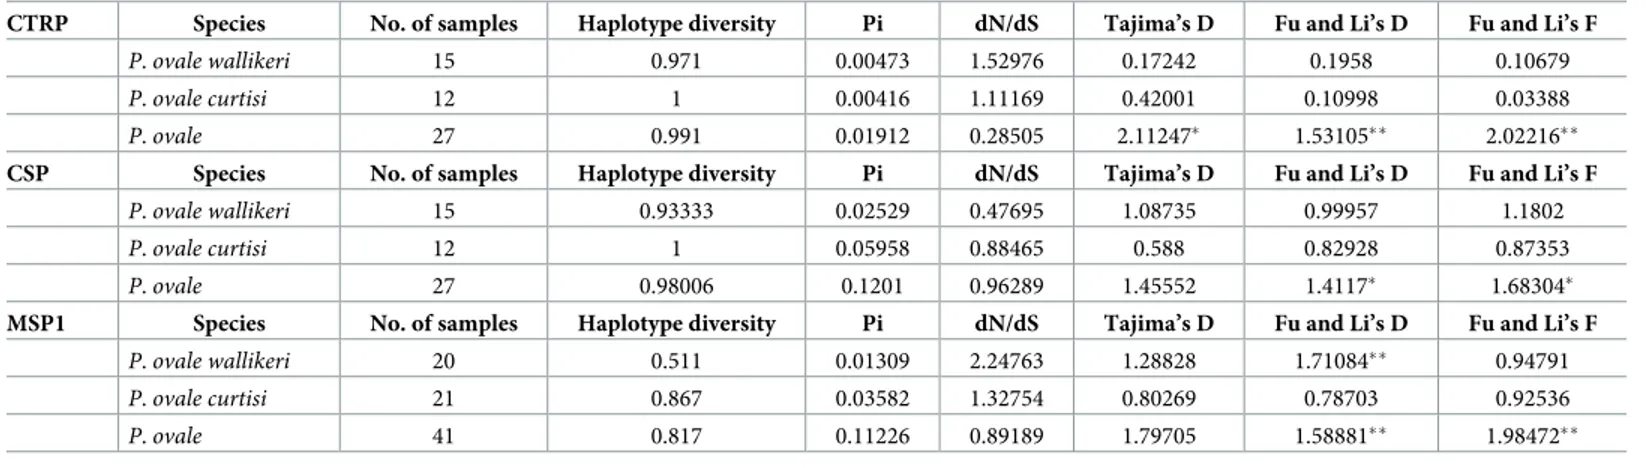 Table 2. Nucleotide diversity and natural selection in P. ovale spp.